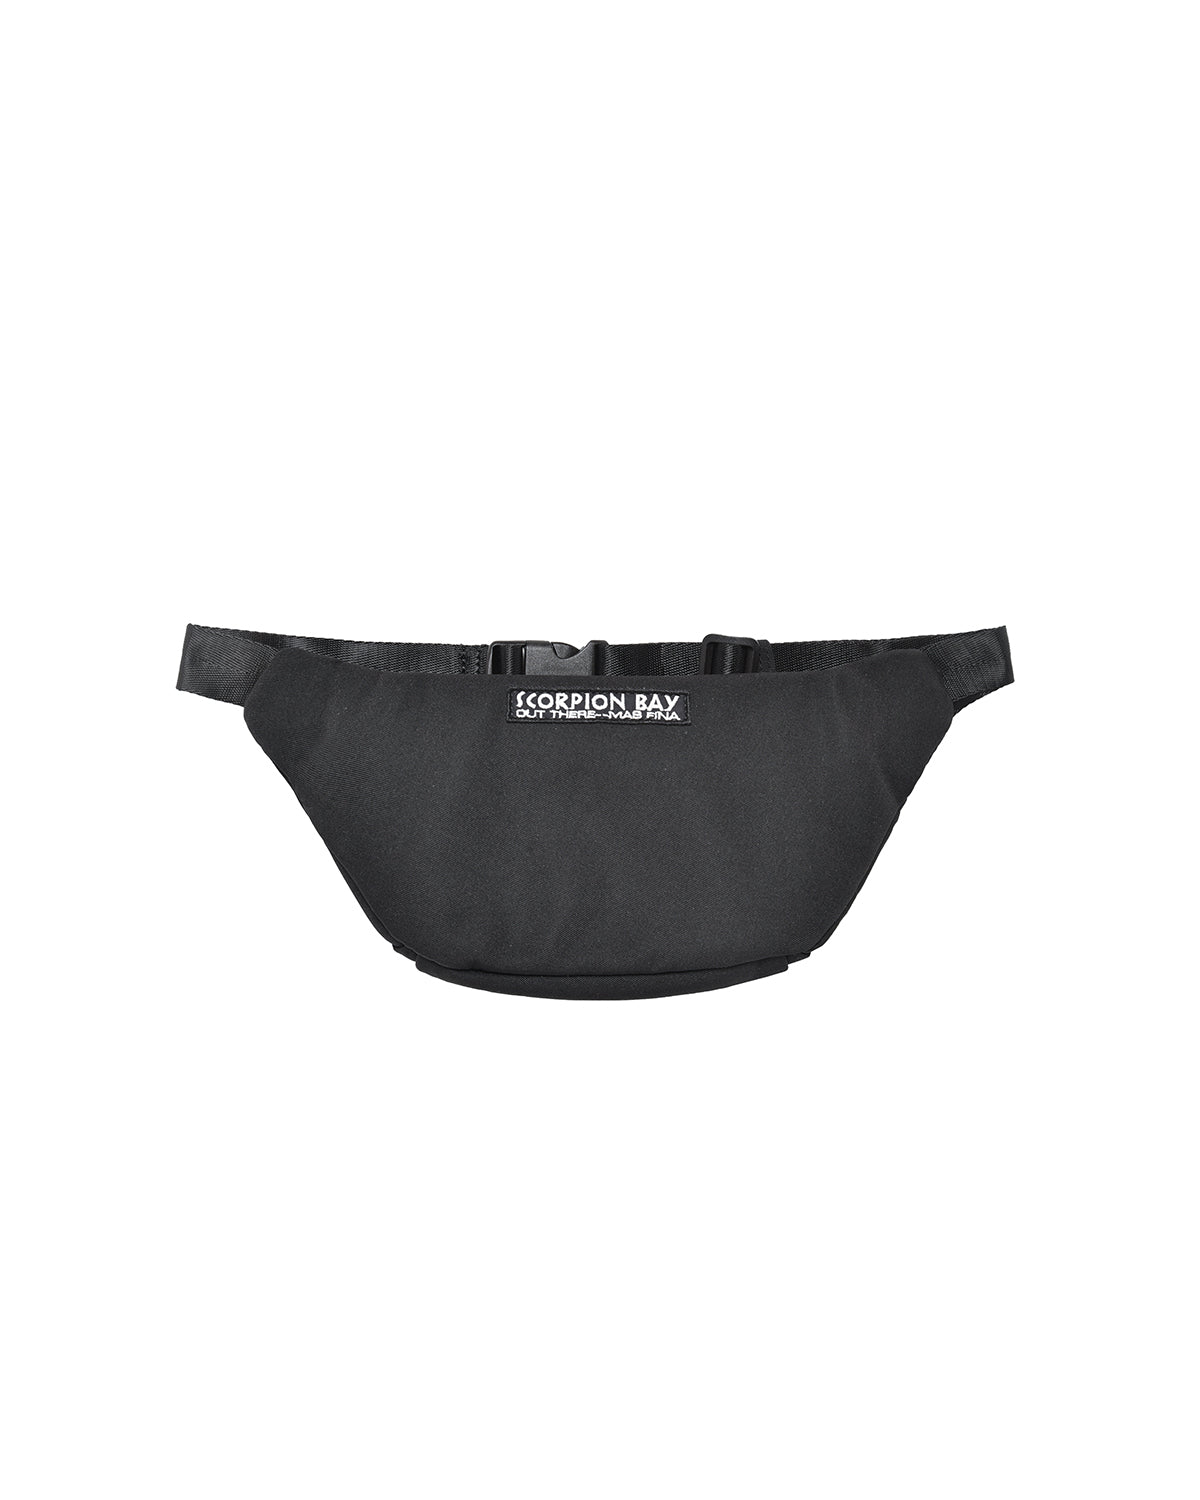 Plain Black Fanny Pack With Logo Label On The Front